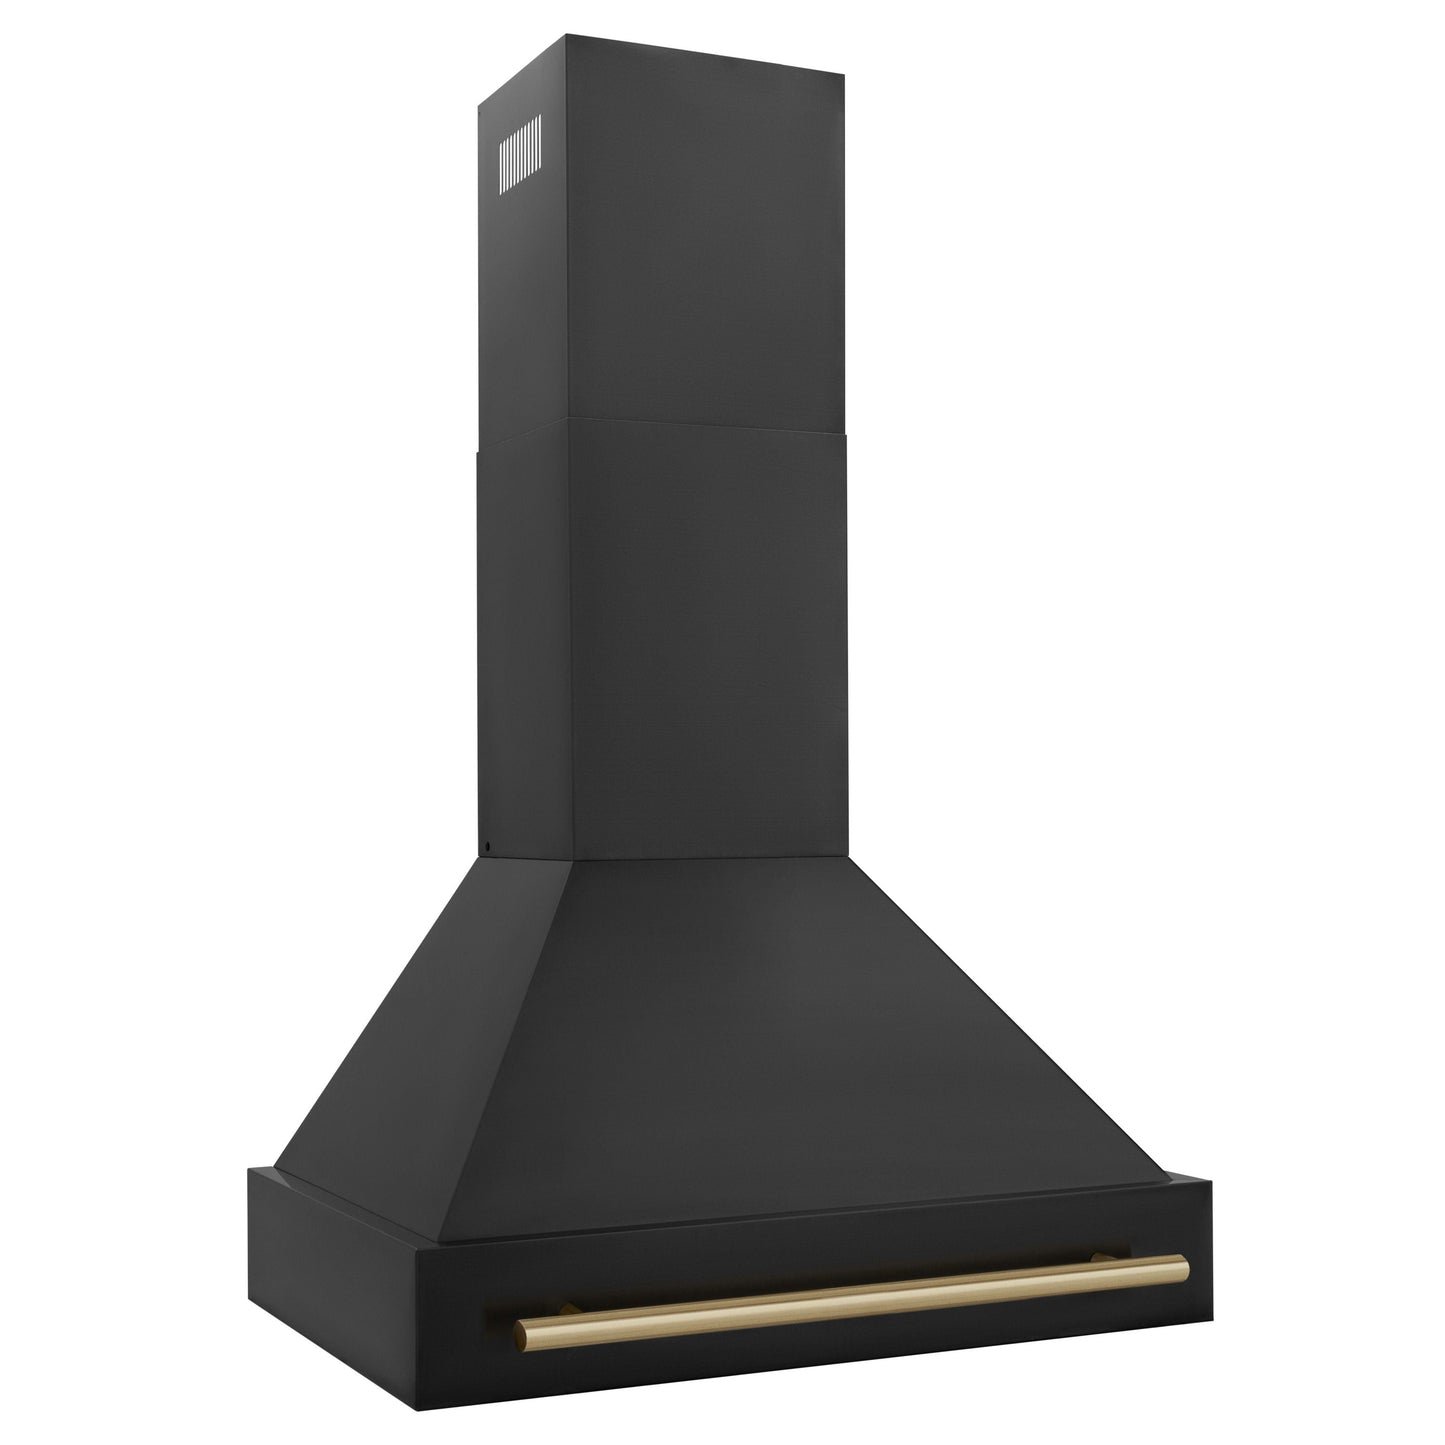 ZLINE 30 in. Autograph Edition in Black Stainless Steel Range Hood with Champagne Bronze Handle, BS655Z-30-CB